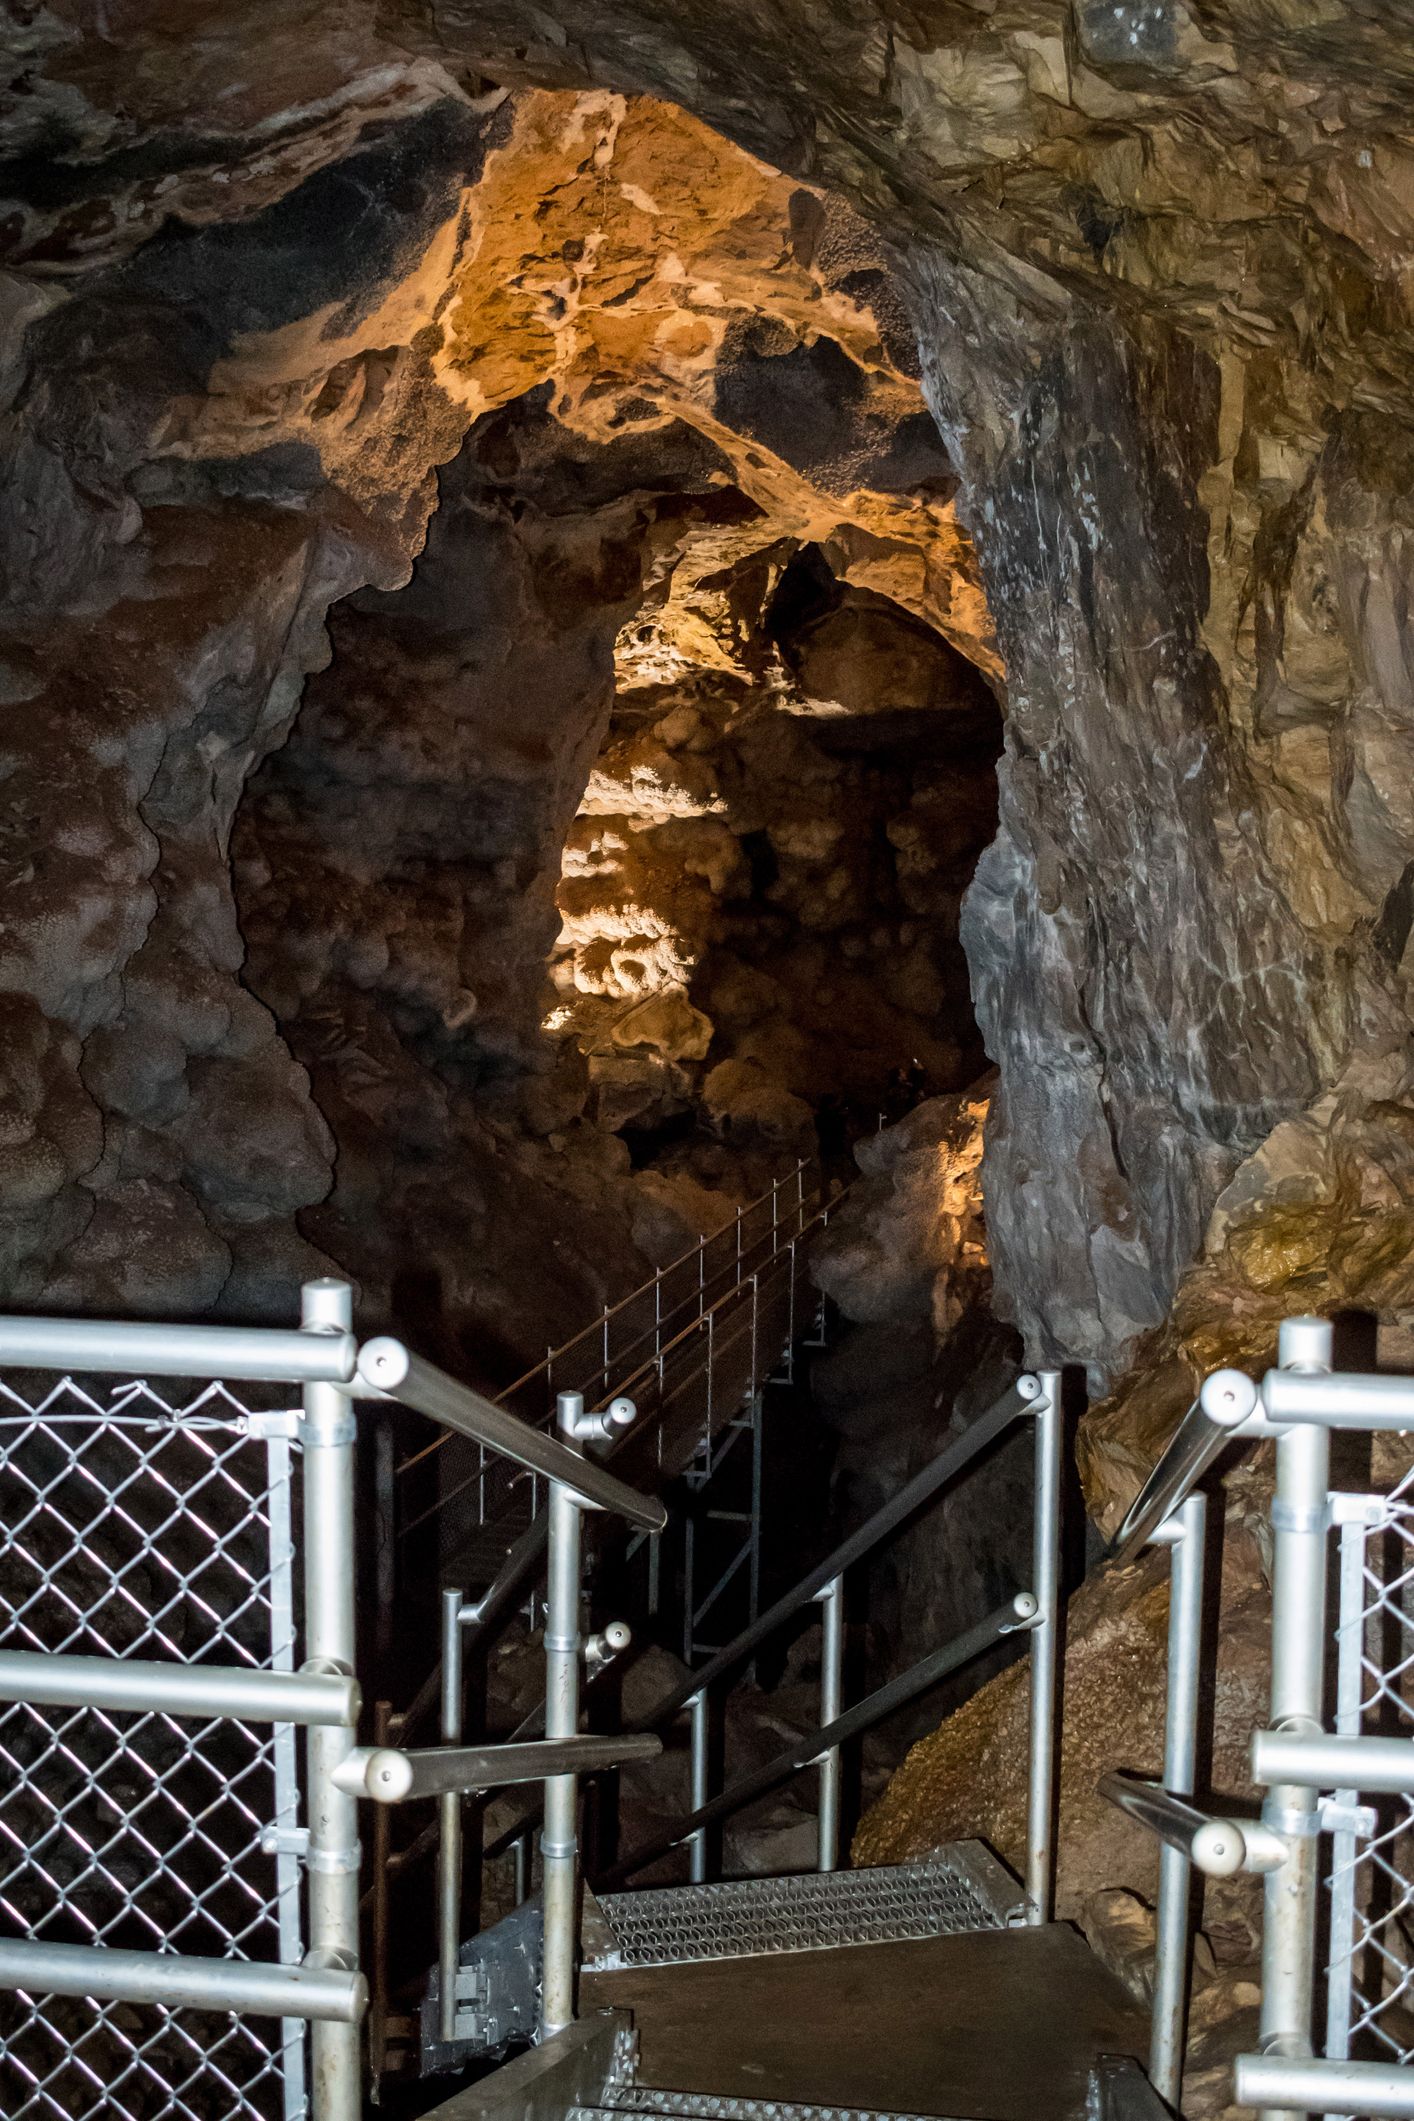 Staircases inside the Jewel Cave in South Dakota, United States.